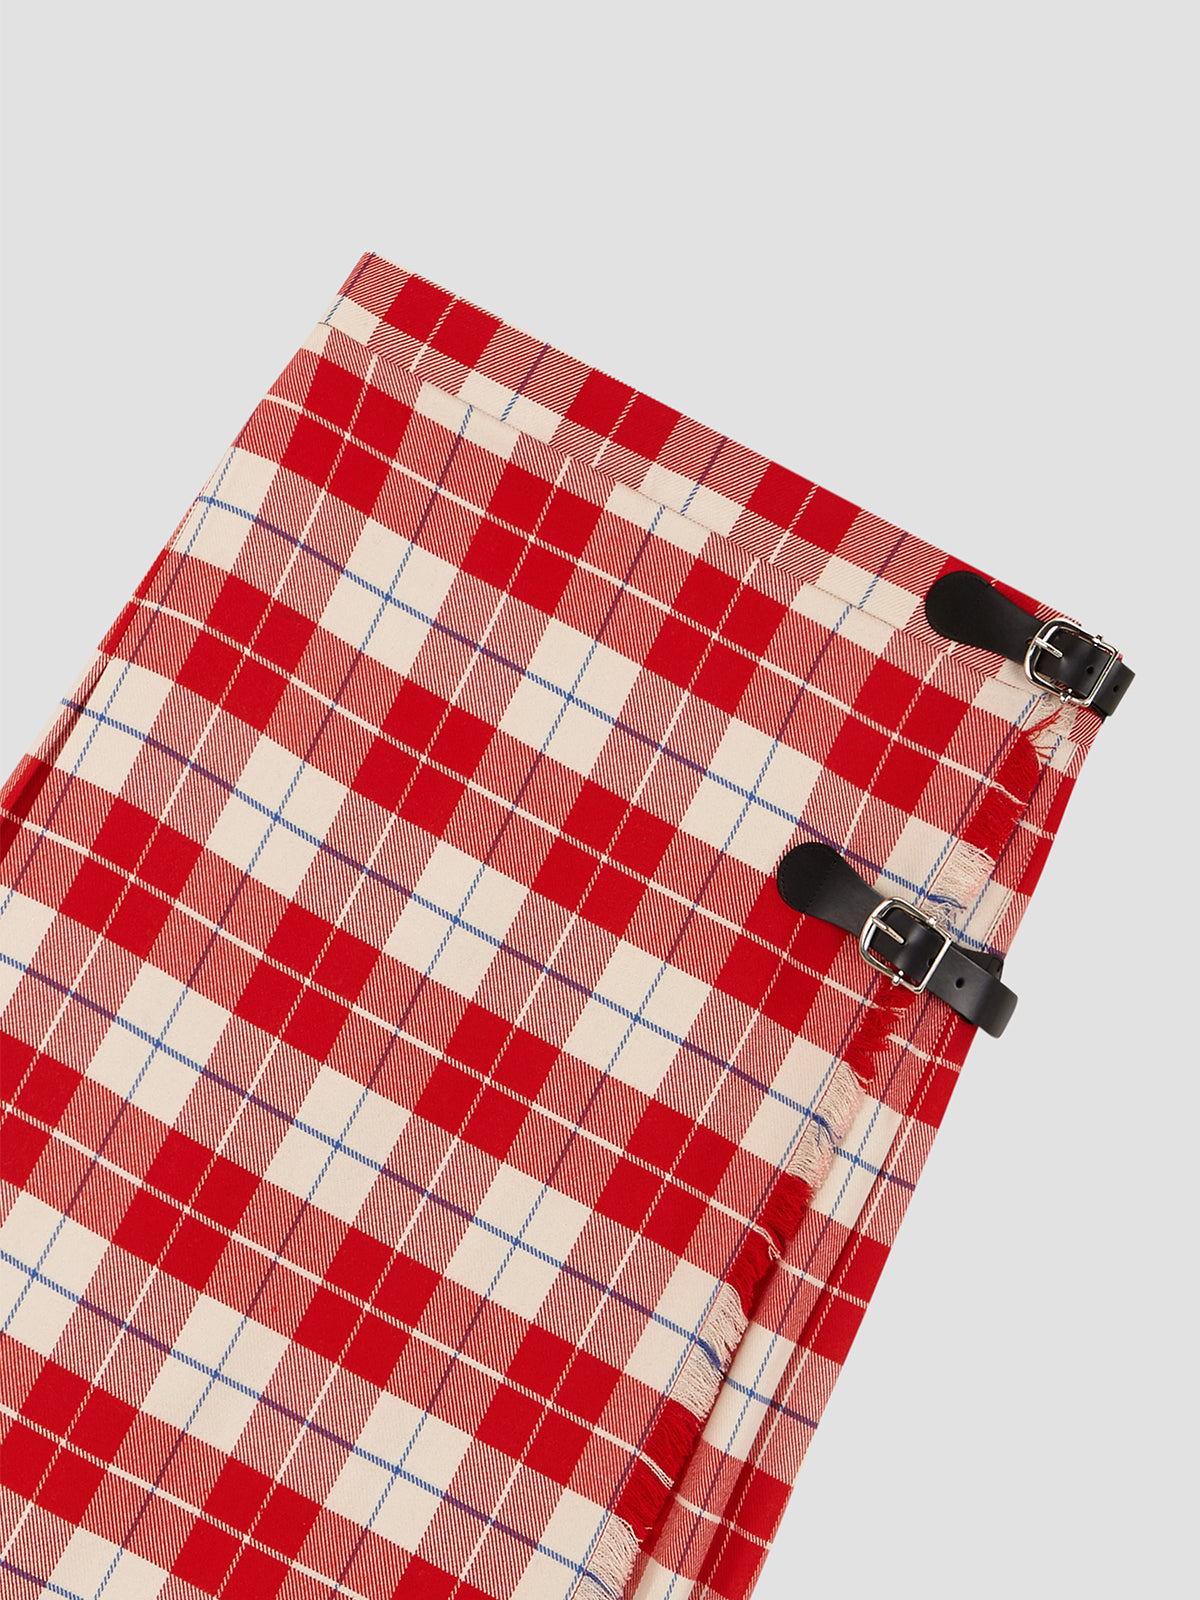 Checked Scottish midi skirt in red and ecru tones. 